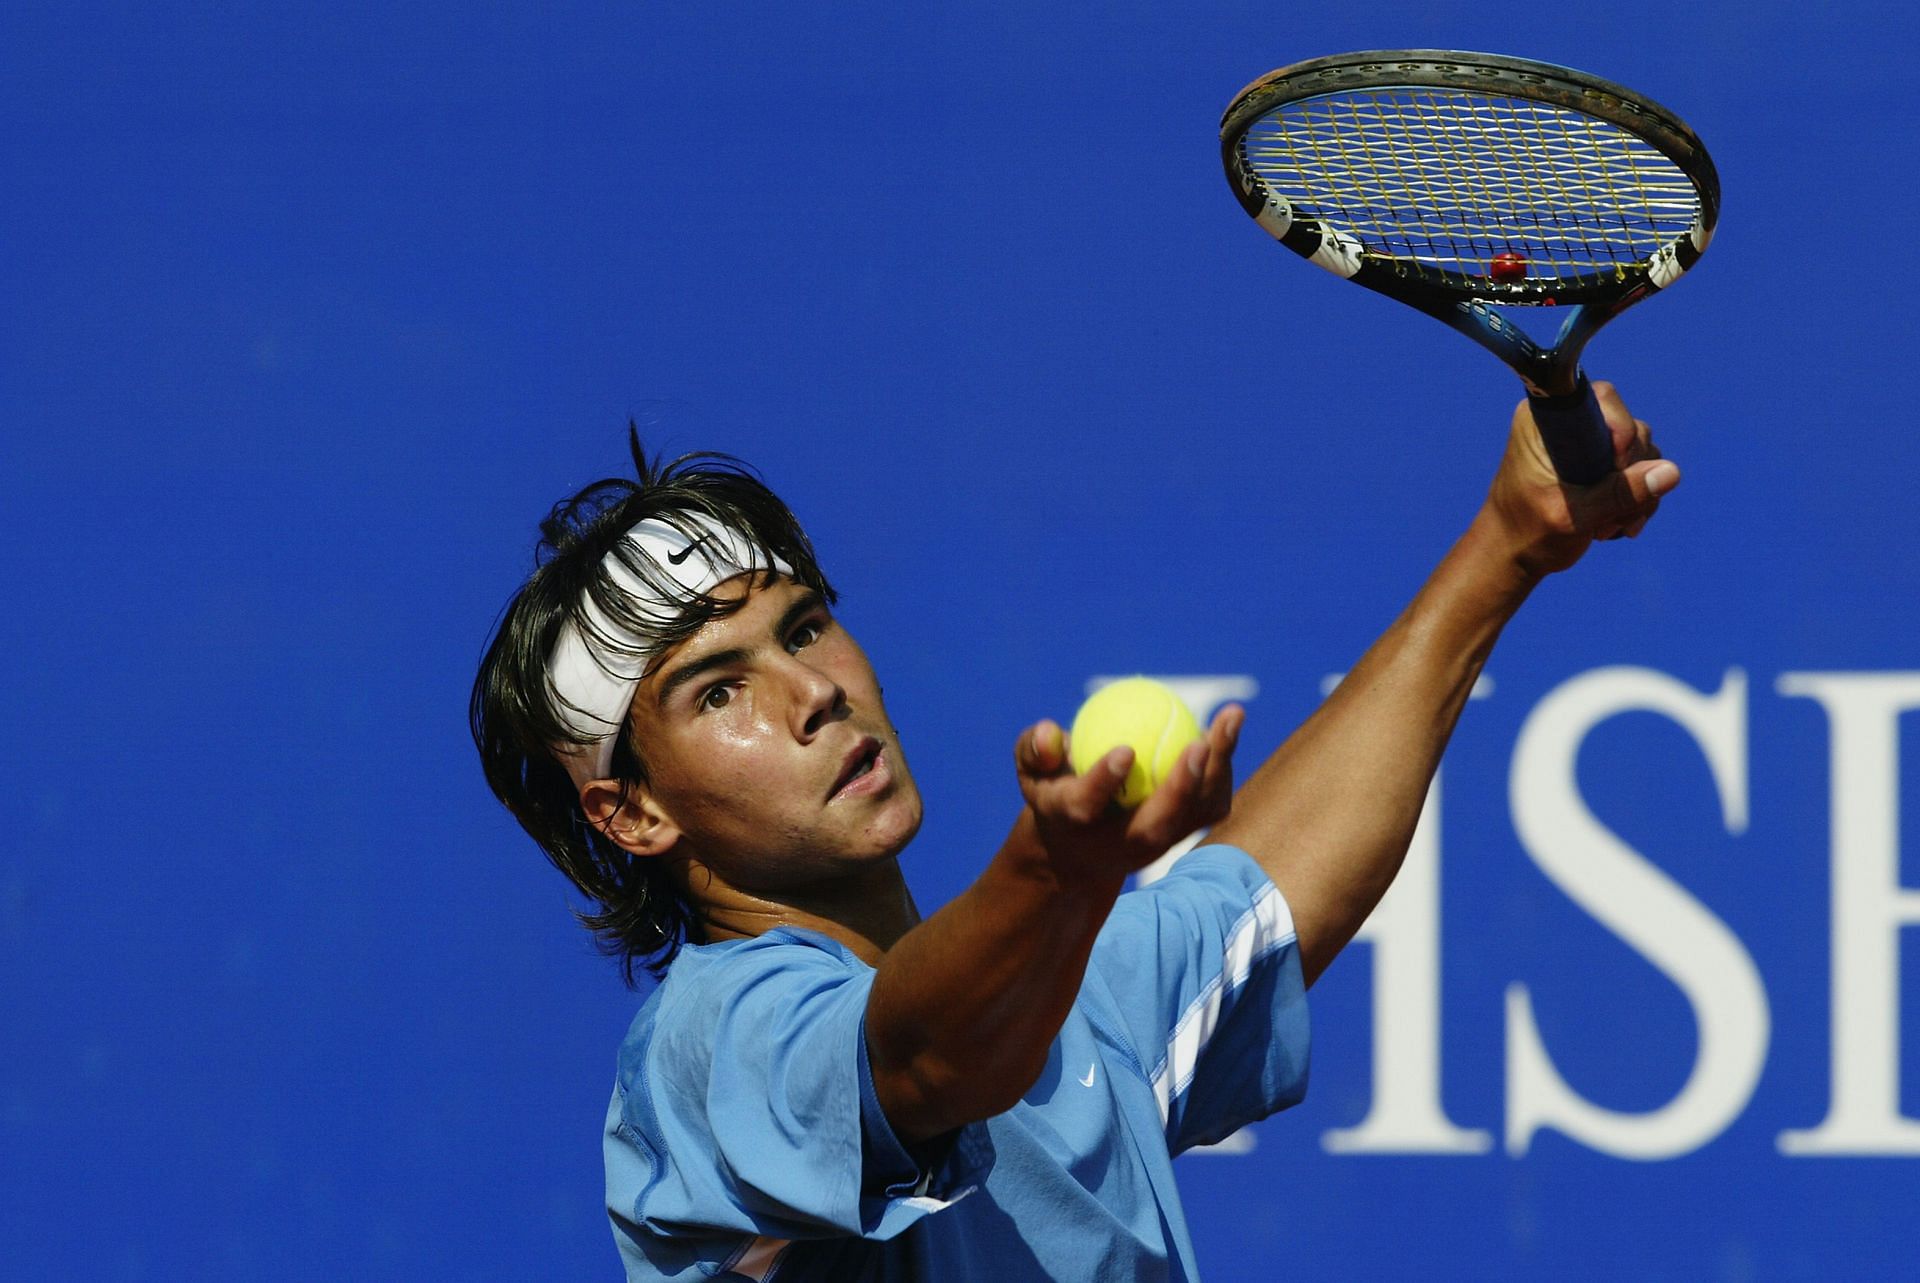 Rafael Nadal serves during his opening-round match at the 2003 Monte-Carlo Masters